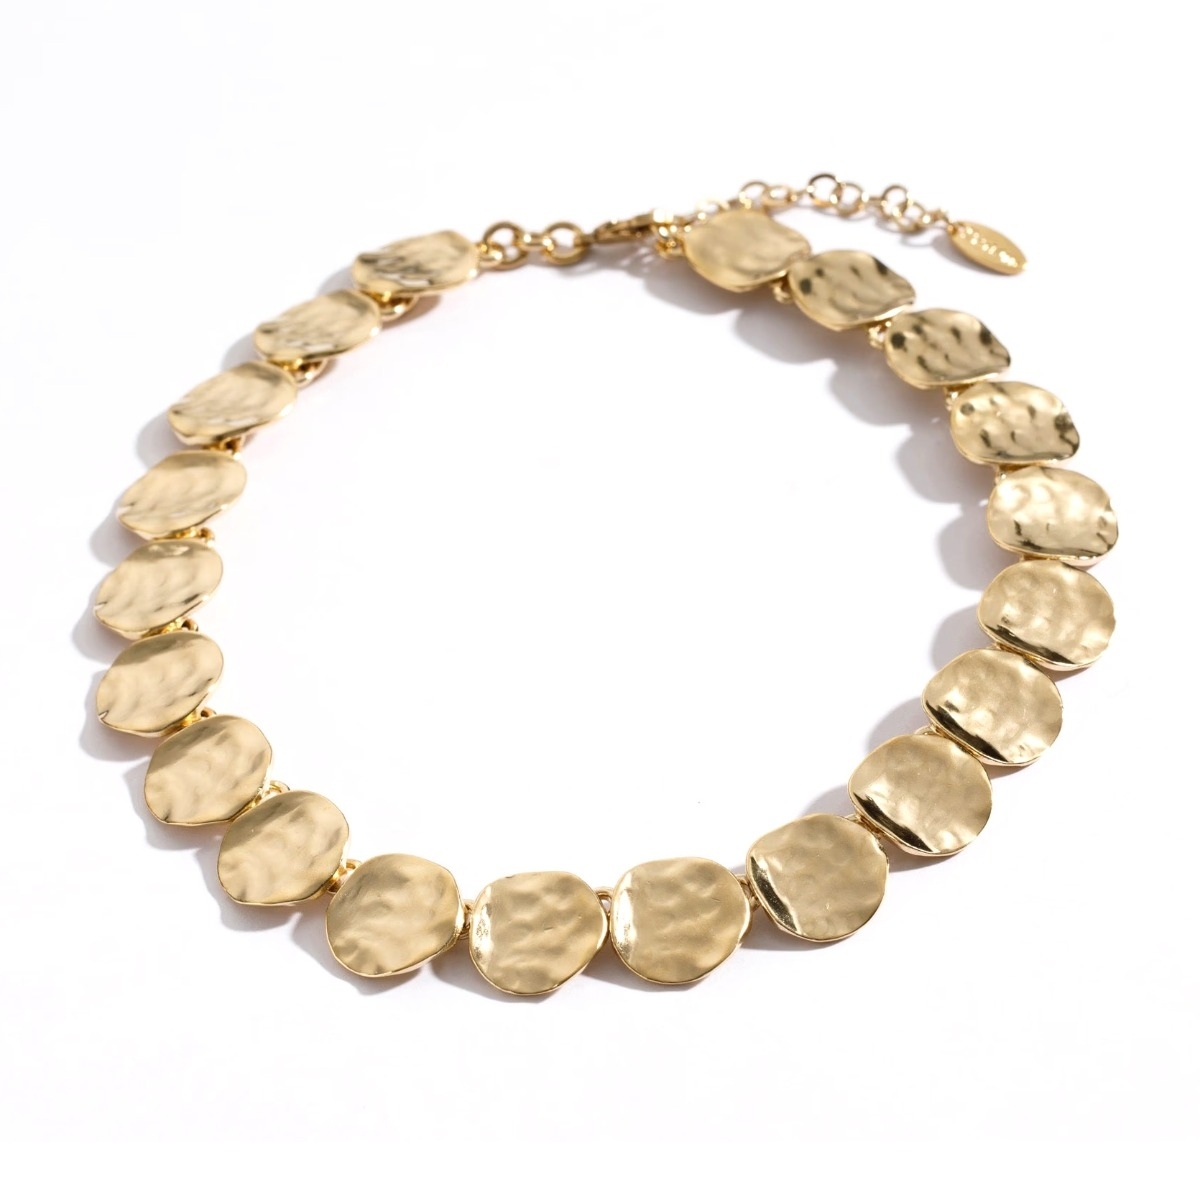 Danon Jewelry Hammered 24K Gold-Plated Circles Necklace - 1